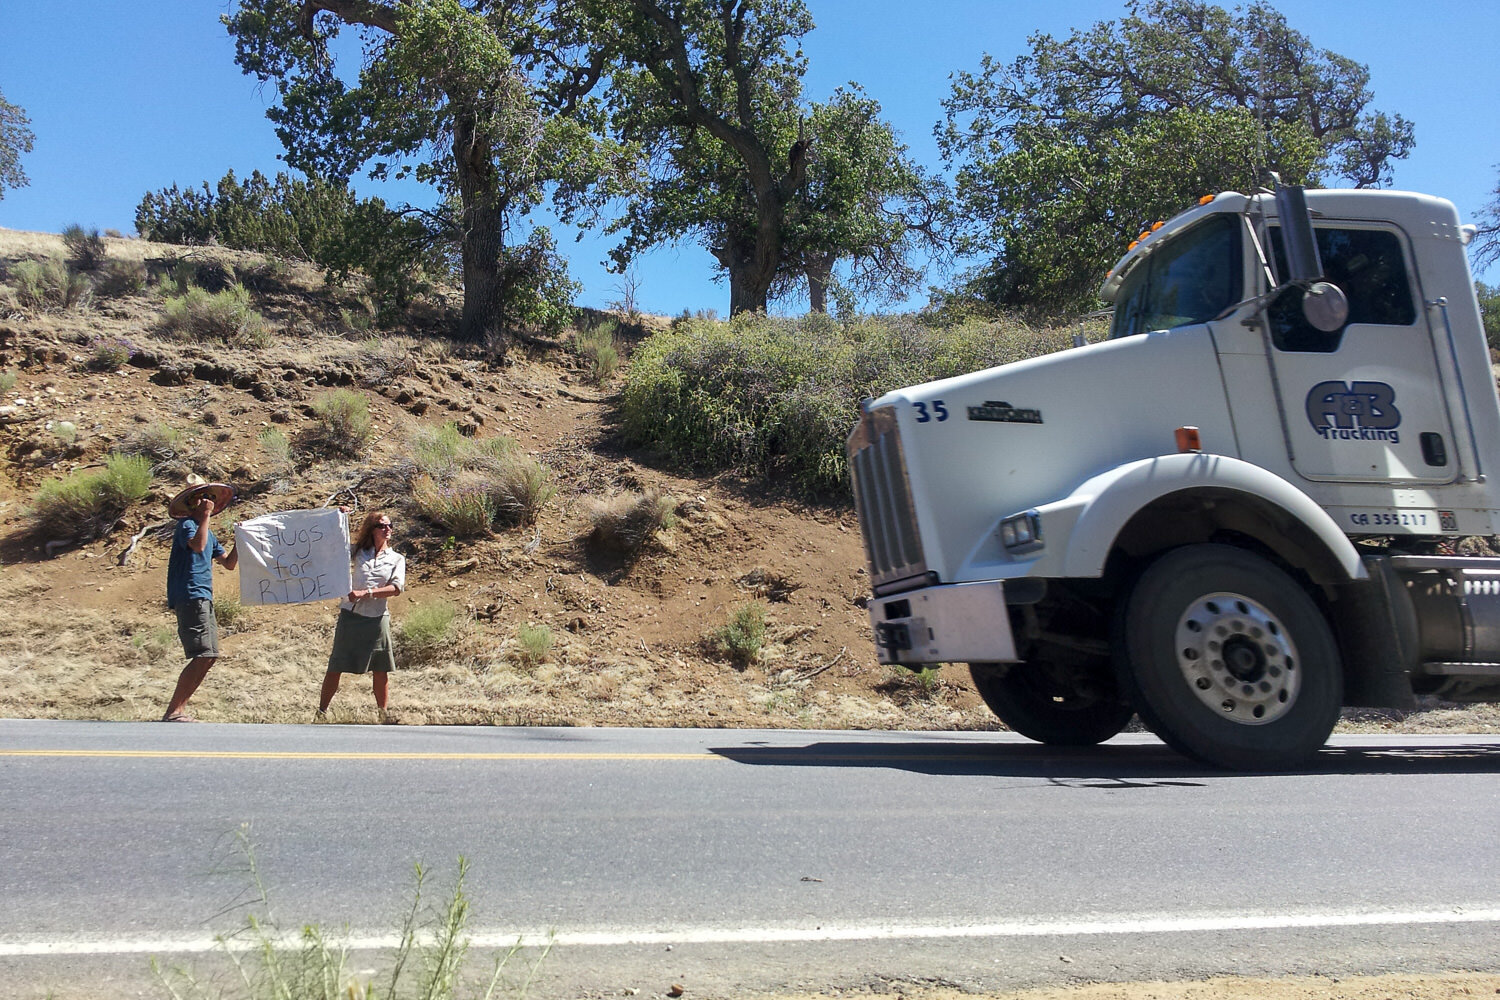 Hikers attempting to hitch a ride into Tehachapi, Ca with a “Hugs for Rides” sign (it worked)